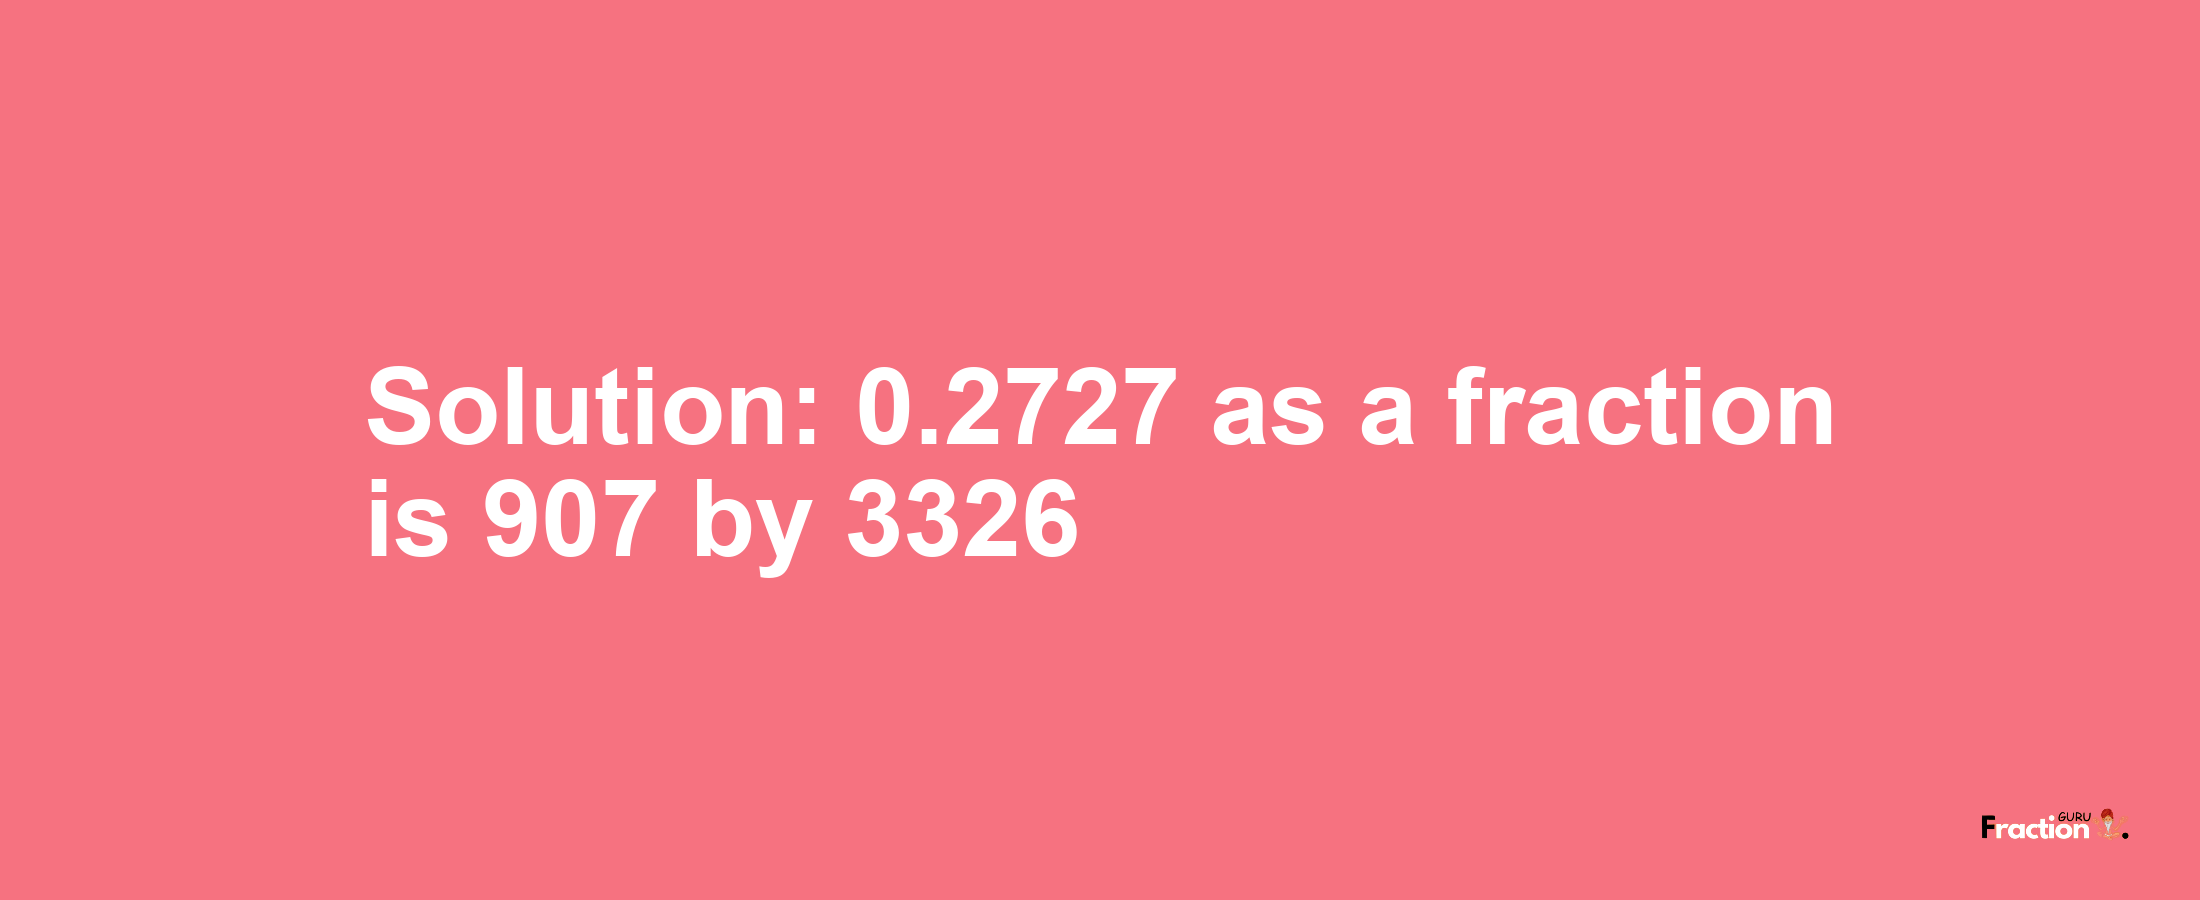 Solution:0.2727 as a fraction is 907/3326